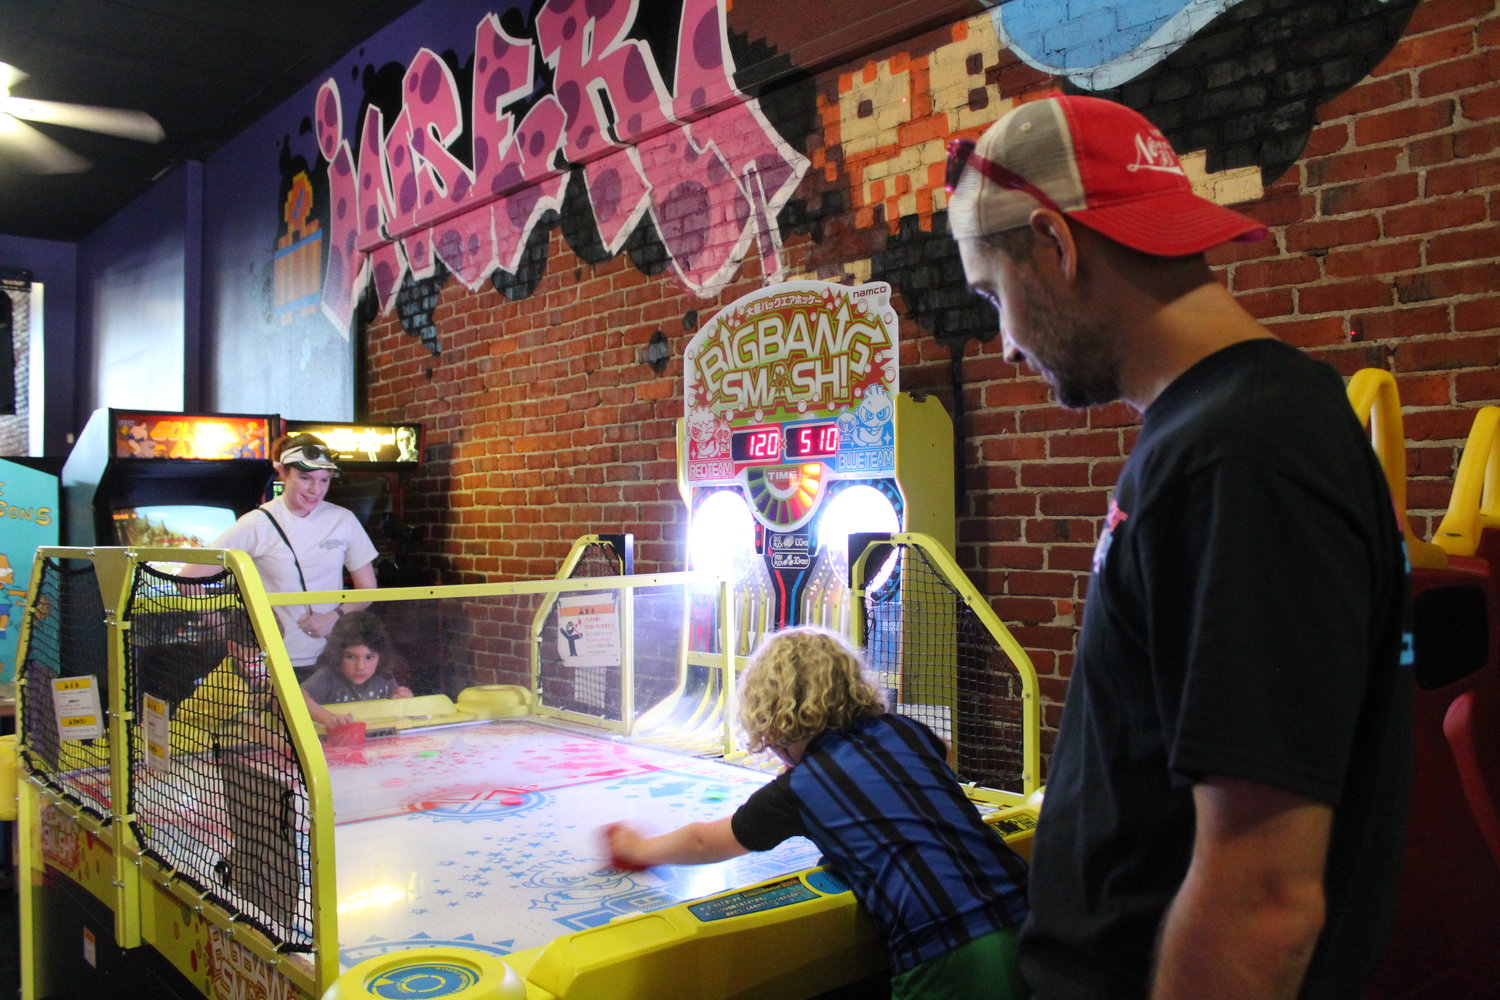 Ryan and Kim Brumbaugh, of Rochester, watch their kids Audrey, 7, Cybil, 5, and Niko, 3, play an air hockey style game from Japan called Big Bang Smash at Insert Coin in Centralia. Ryan Brumbaugh said he has become the retro arcade bar's "number one fanboy".